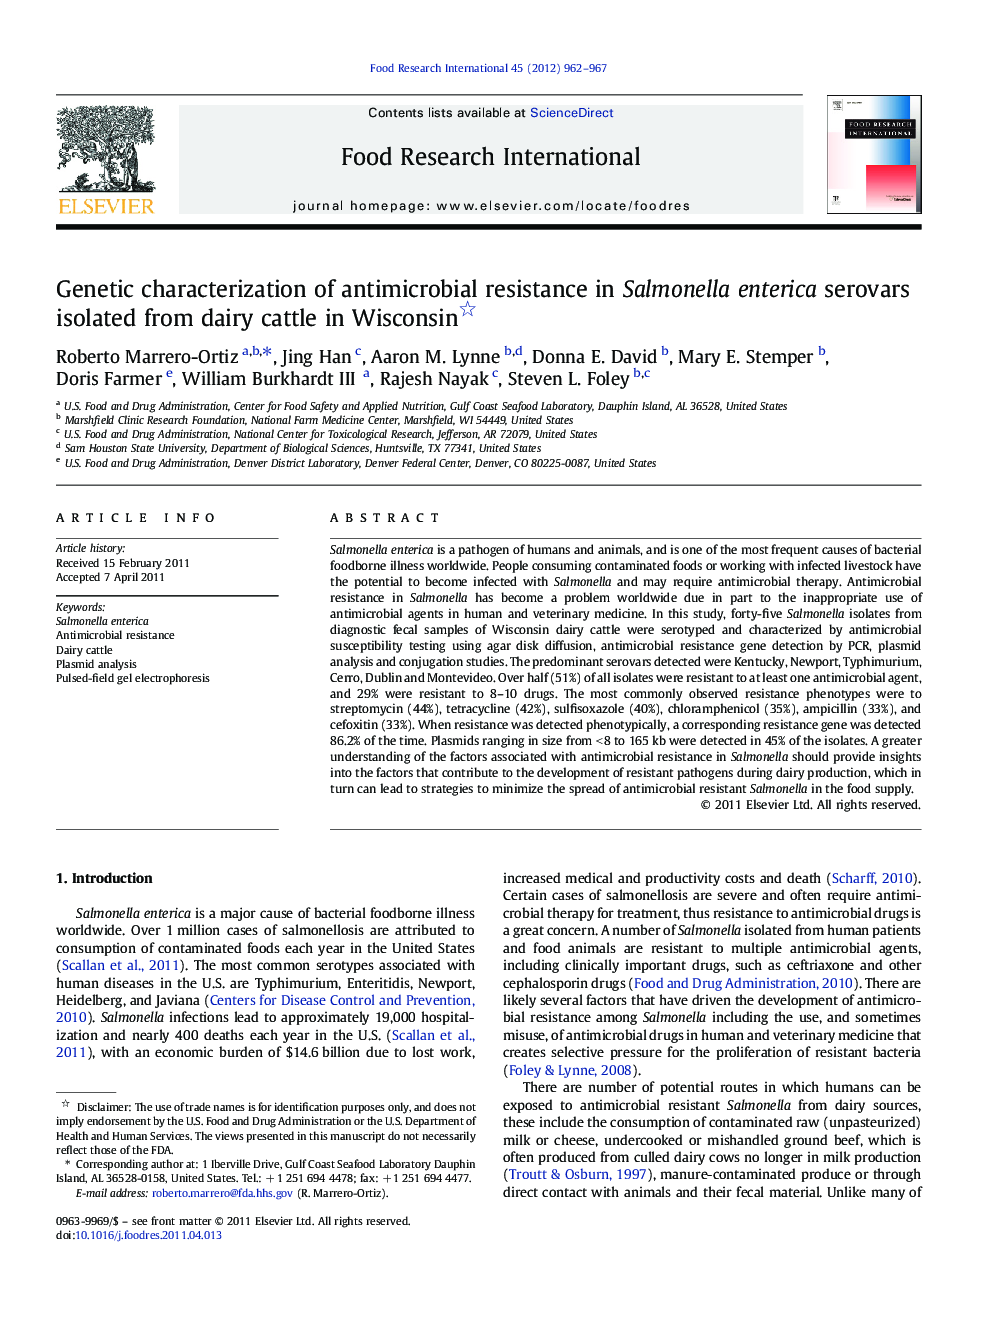 Genetic characterization of antimicrobial resistance in Salmonella enterica serovars isolated from dairy cattle in Wisconsin 